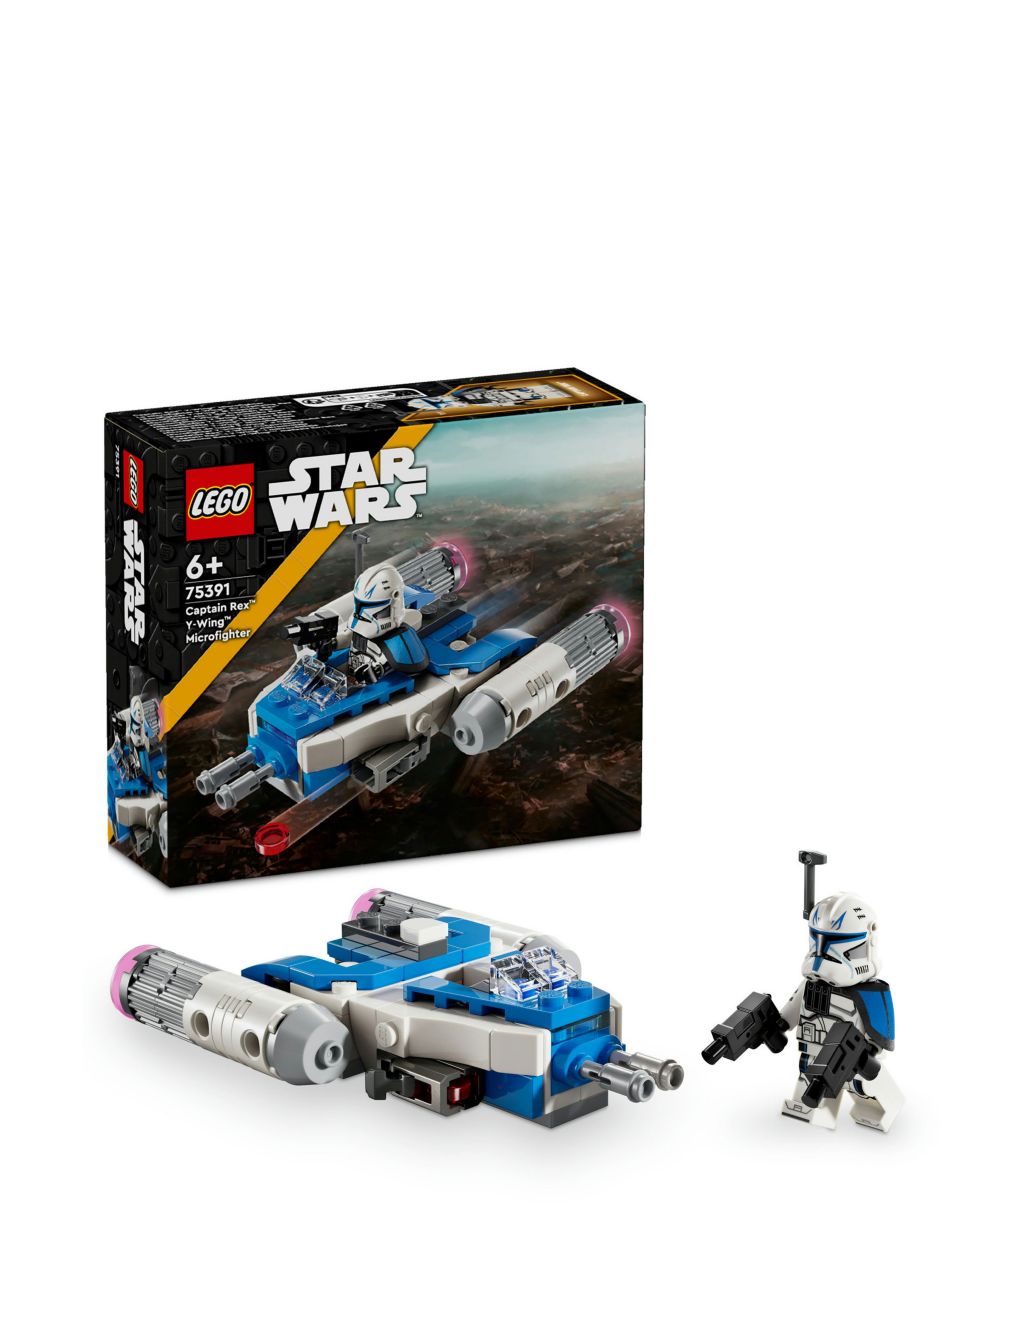 LEGO® Star Wars™ Captain Rex™ Y-Wing™ Microfighter Set 75391 (6+ Yrs)